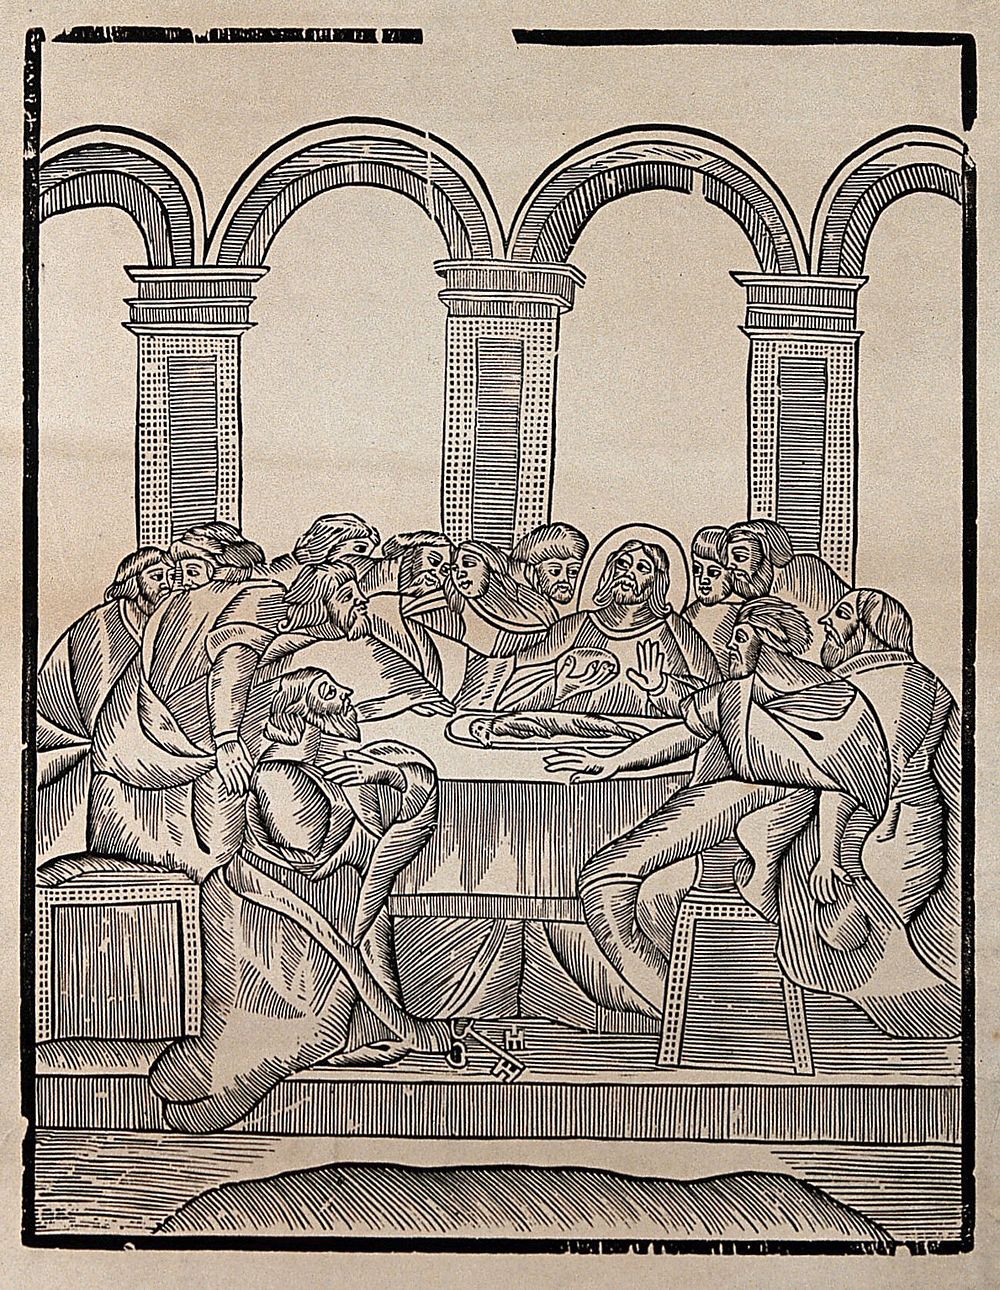 The Last Supper: Saint Peter kneeling in front of the table, Judas sits at the extreme right. Woodcut.